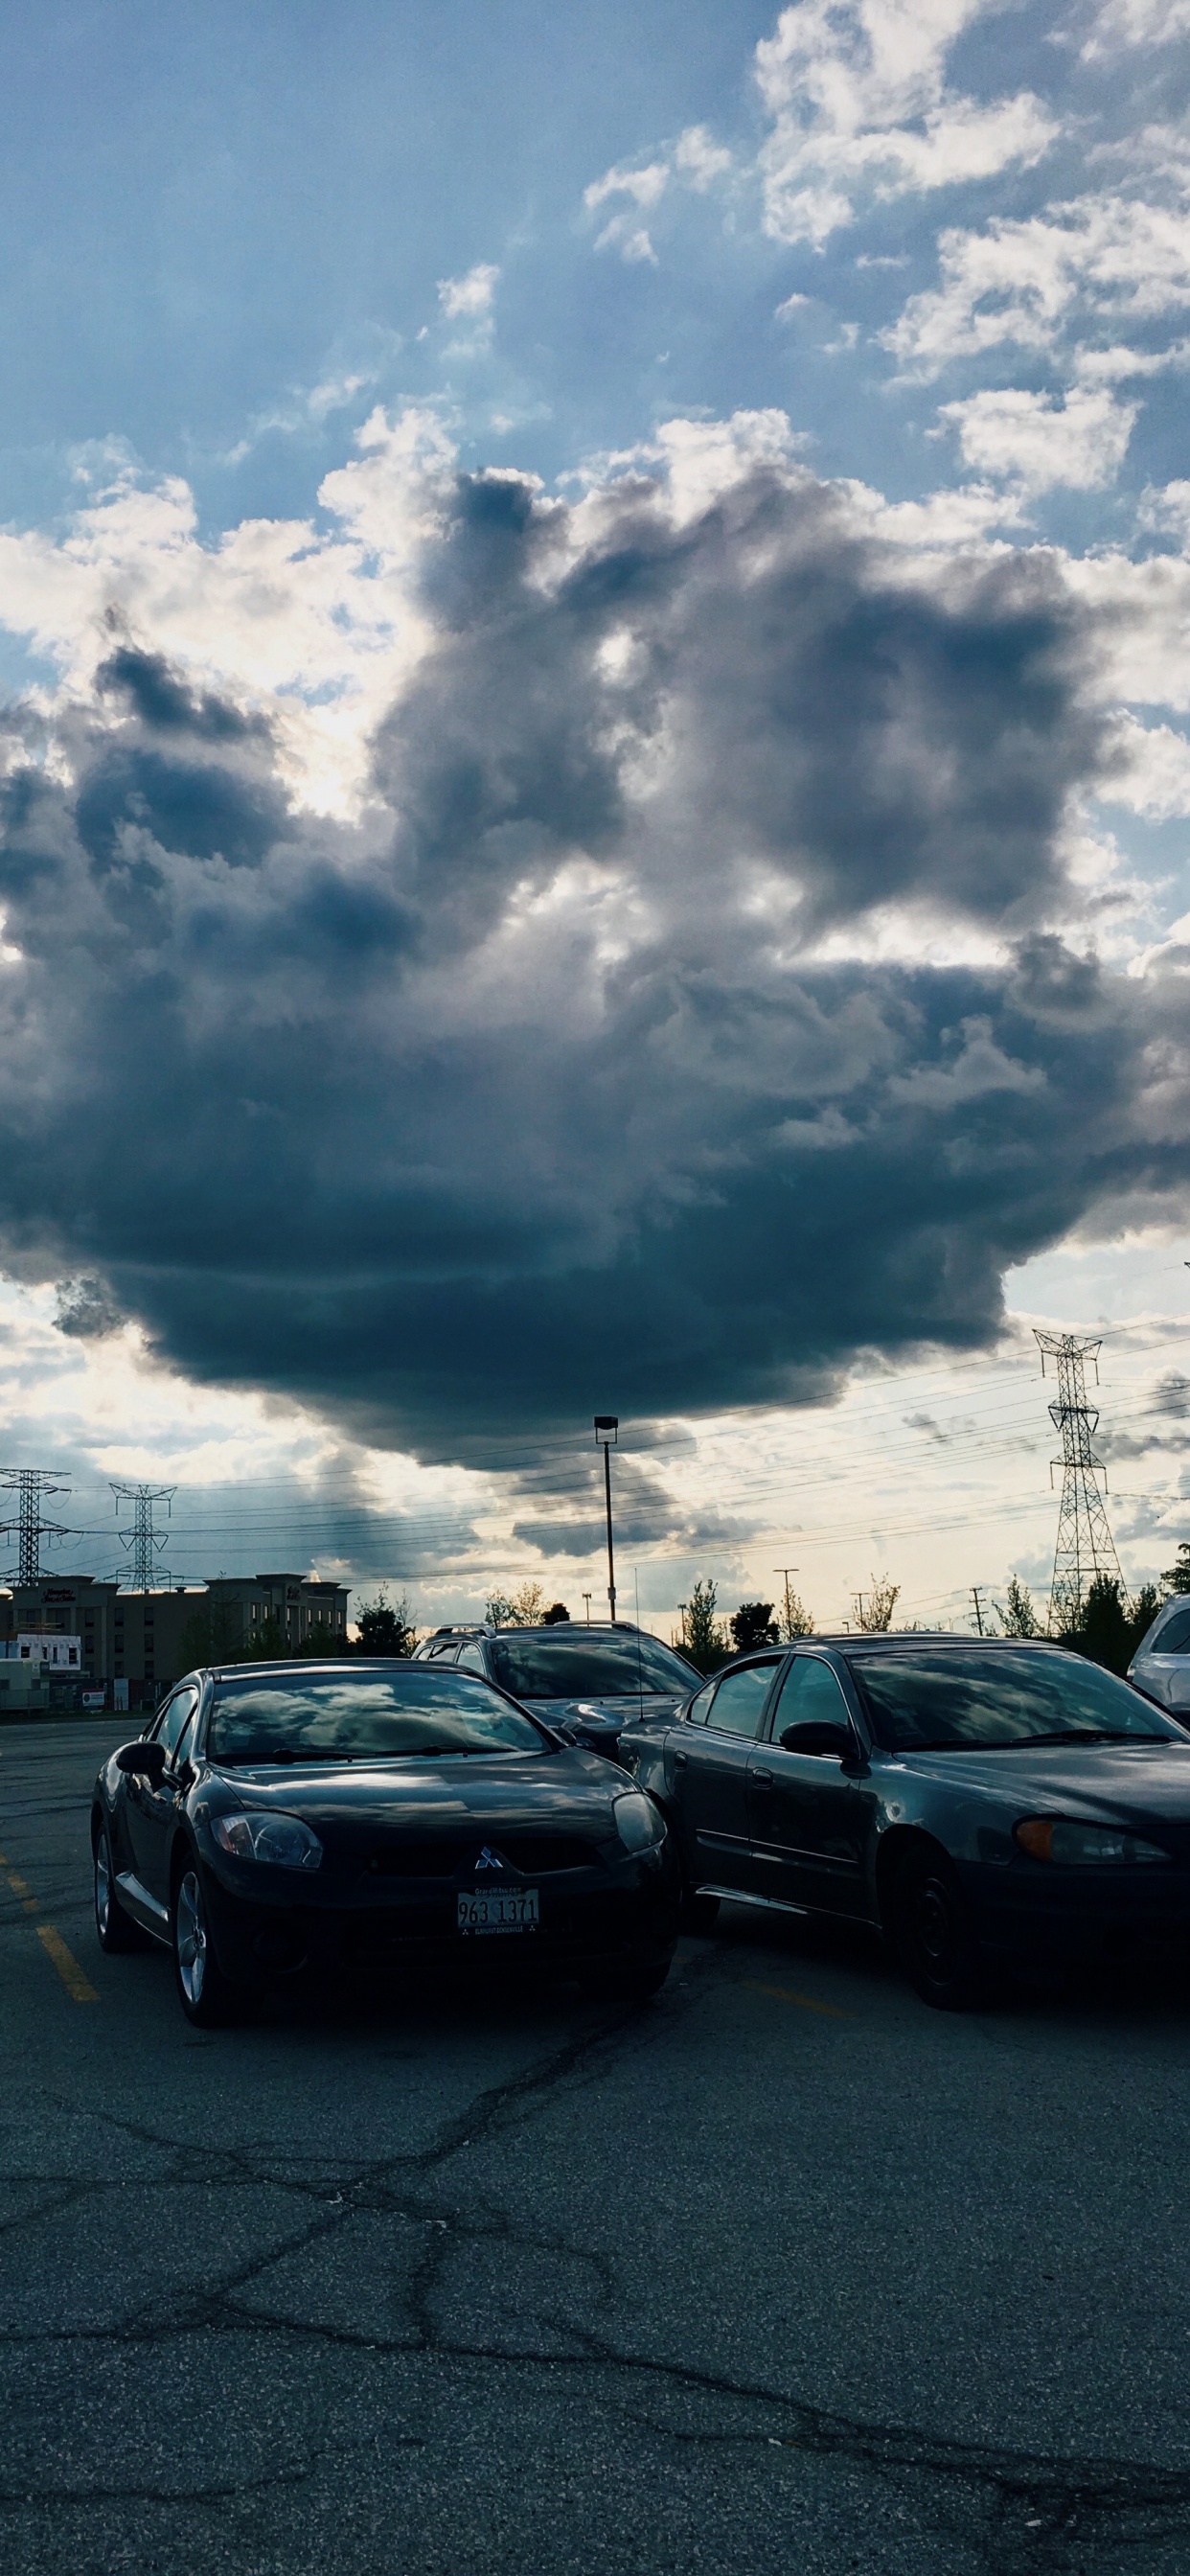 Cars on Road Under Cloudy Sky During Daytime. Wallpaper in 1242x2688 Resolution